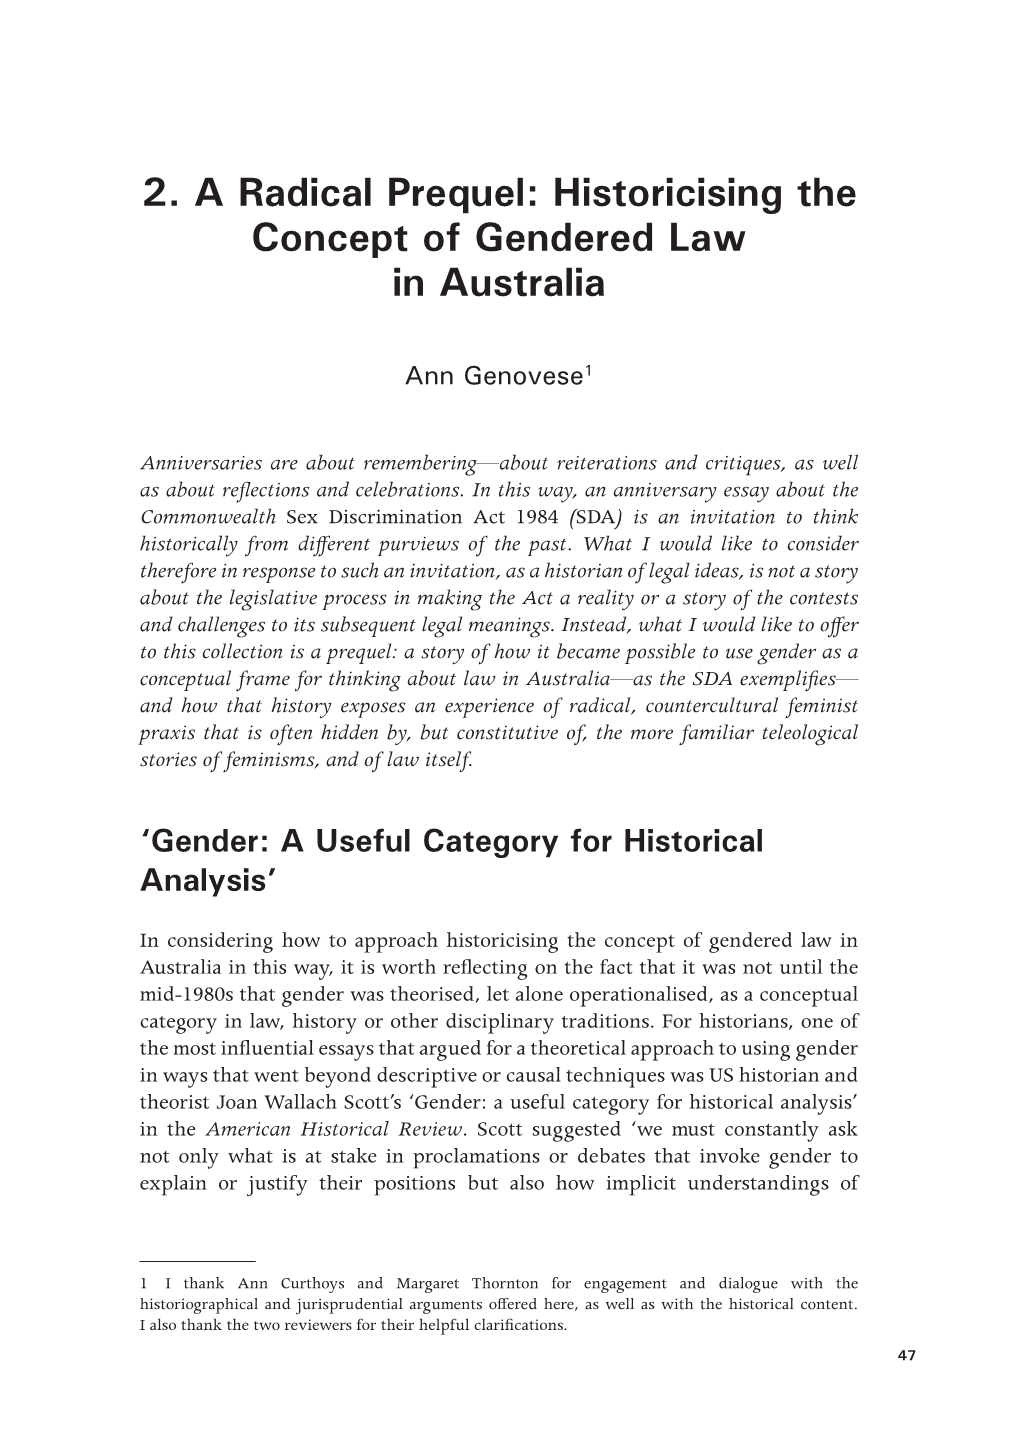 Historicising the Concept of Gendered Law in Australia